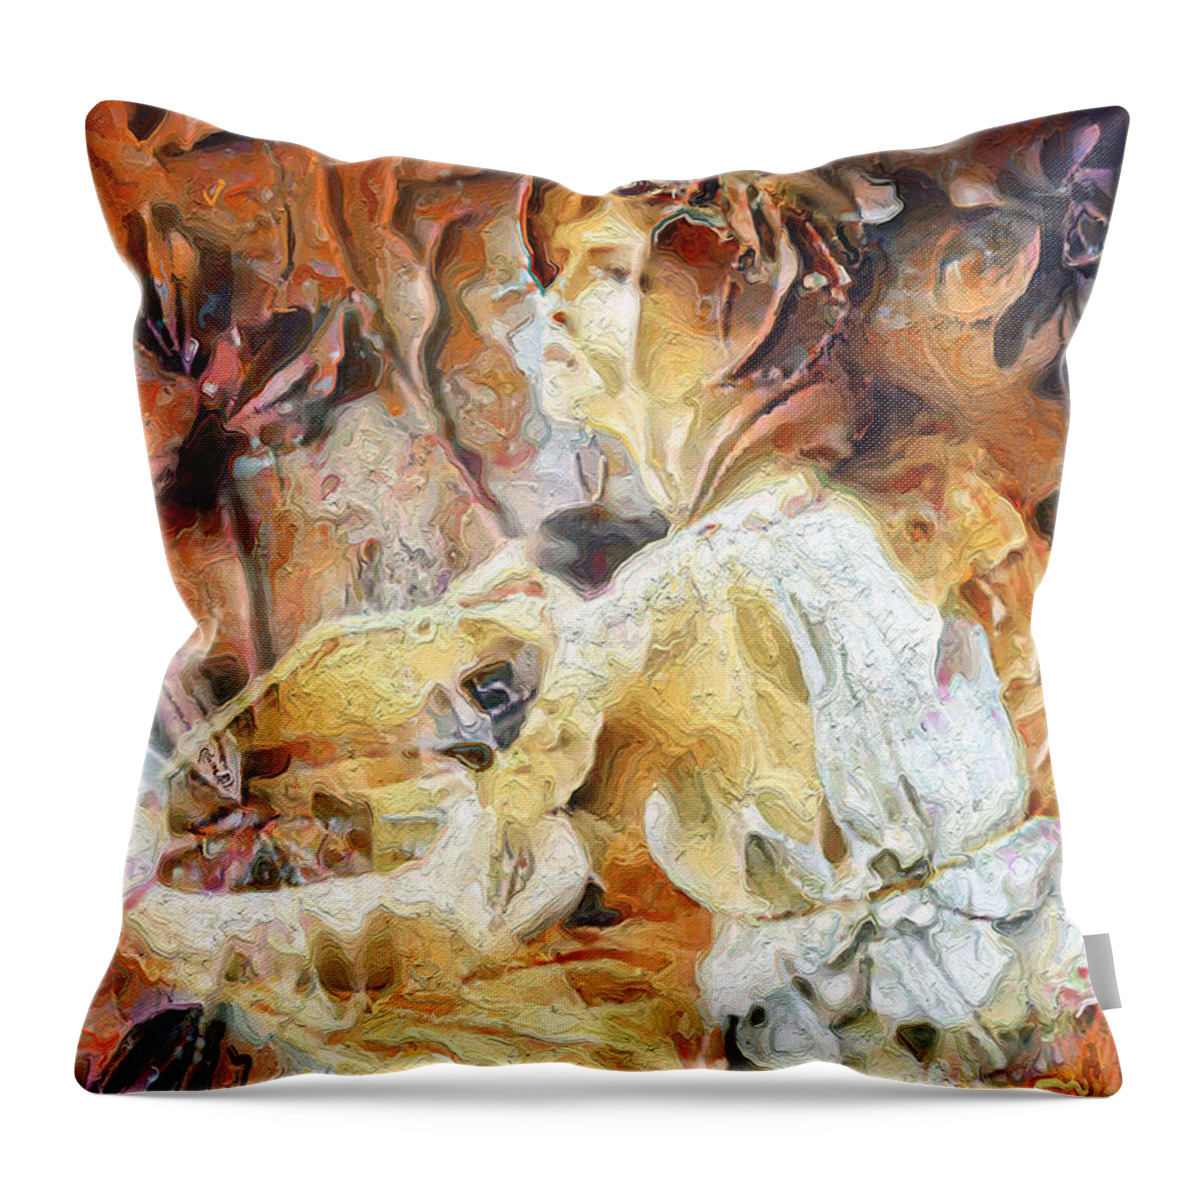 Goddess Of Secrets Throw Pillow featuring the mixed media Harpocrates Goddess of Secrets by Laurie's Intuitive